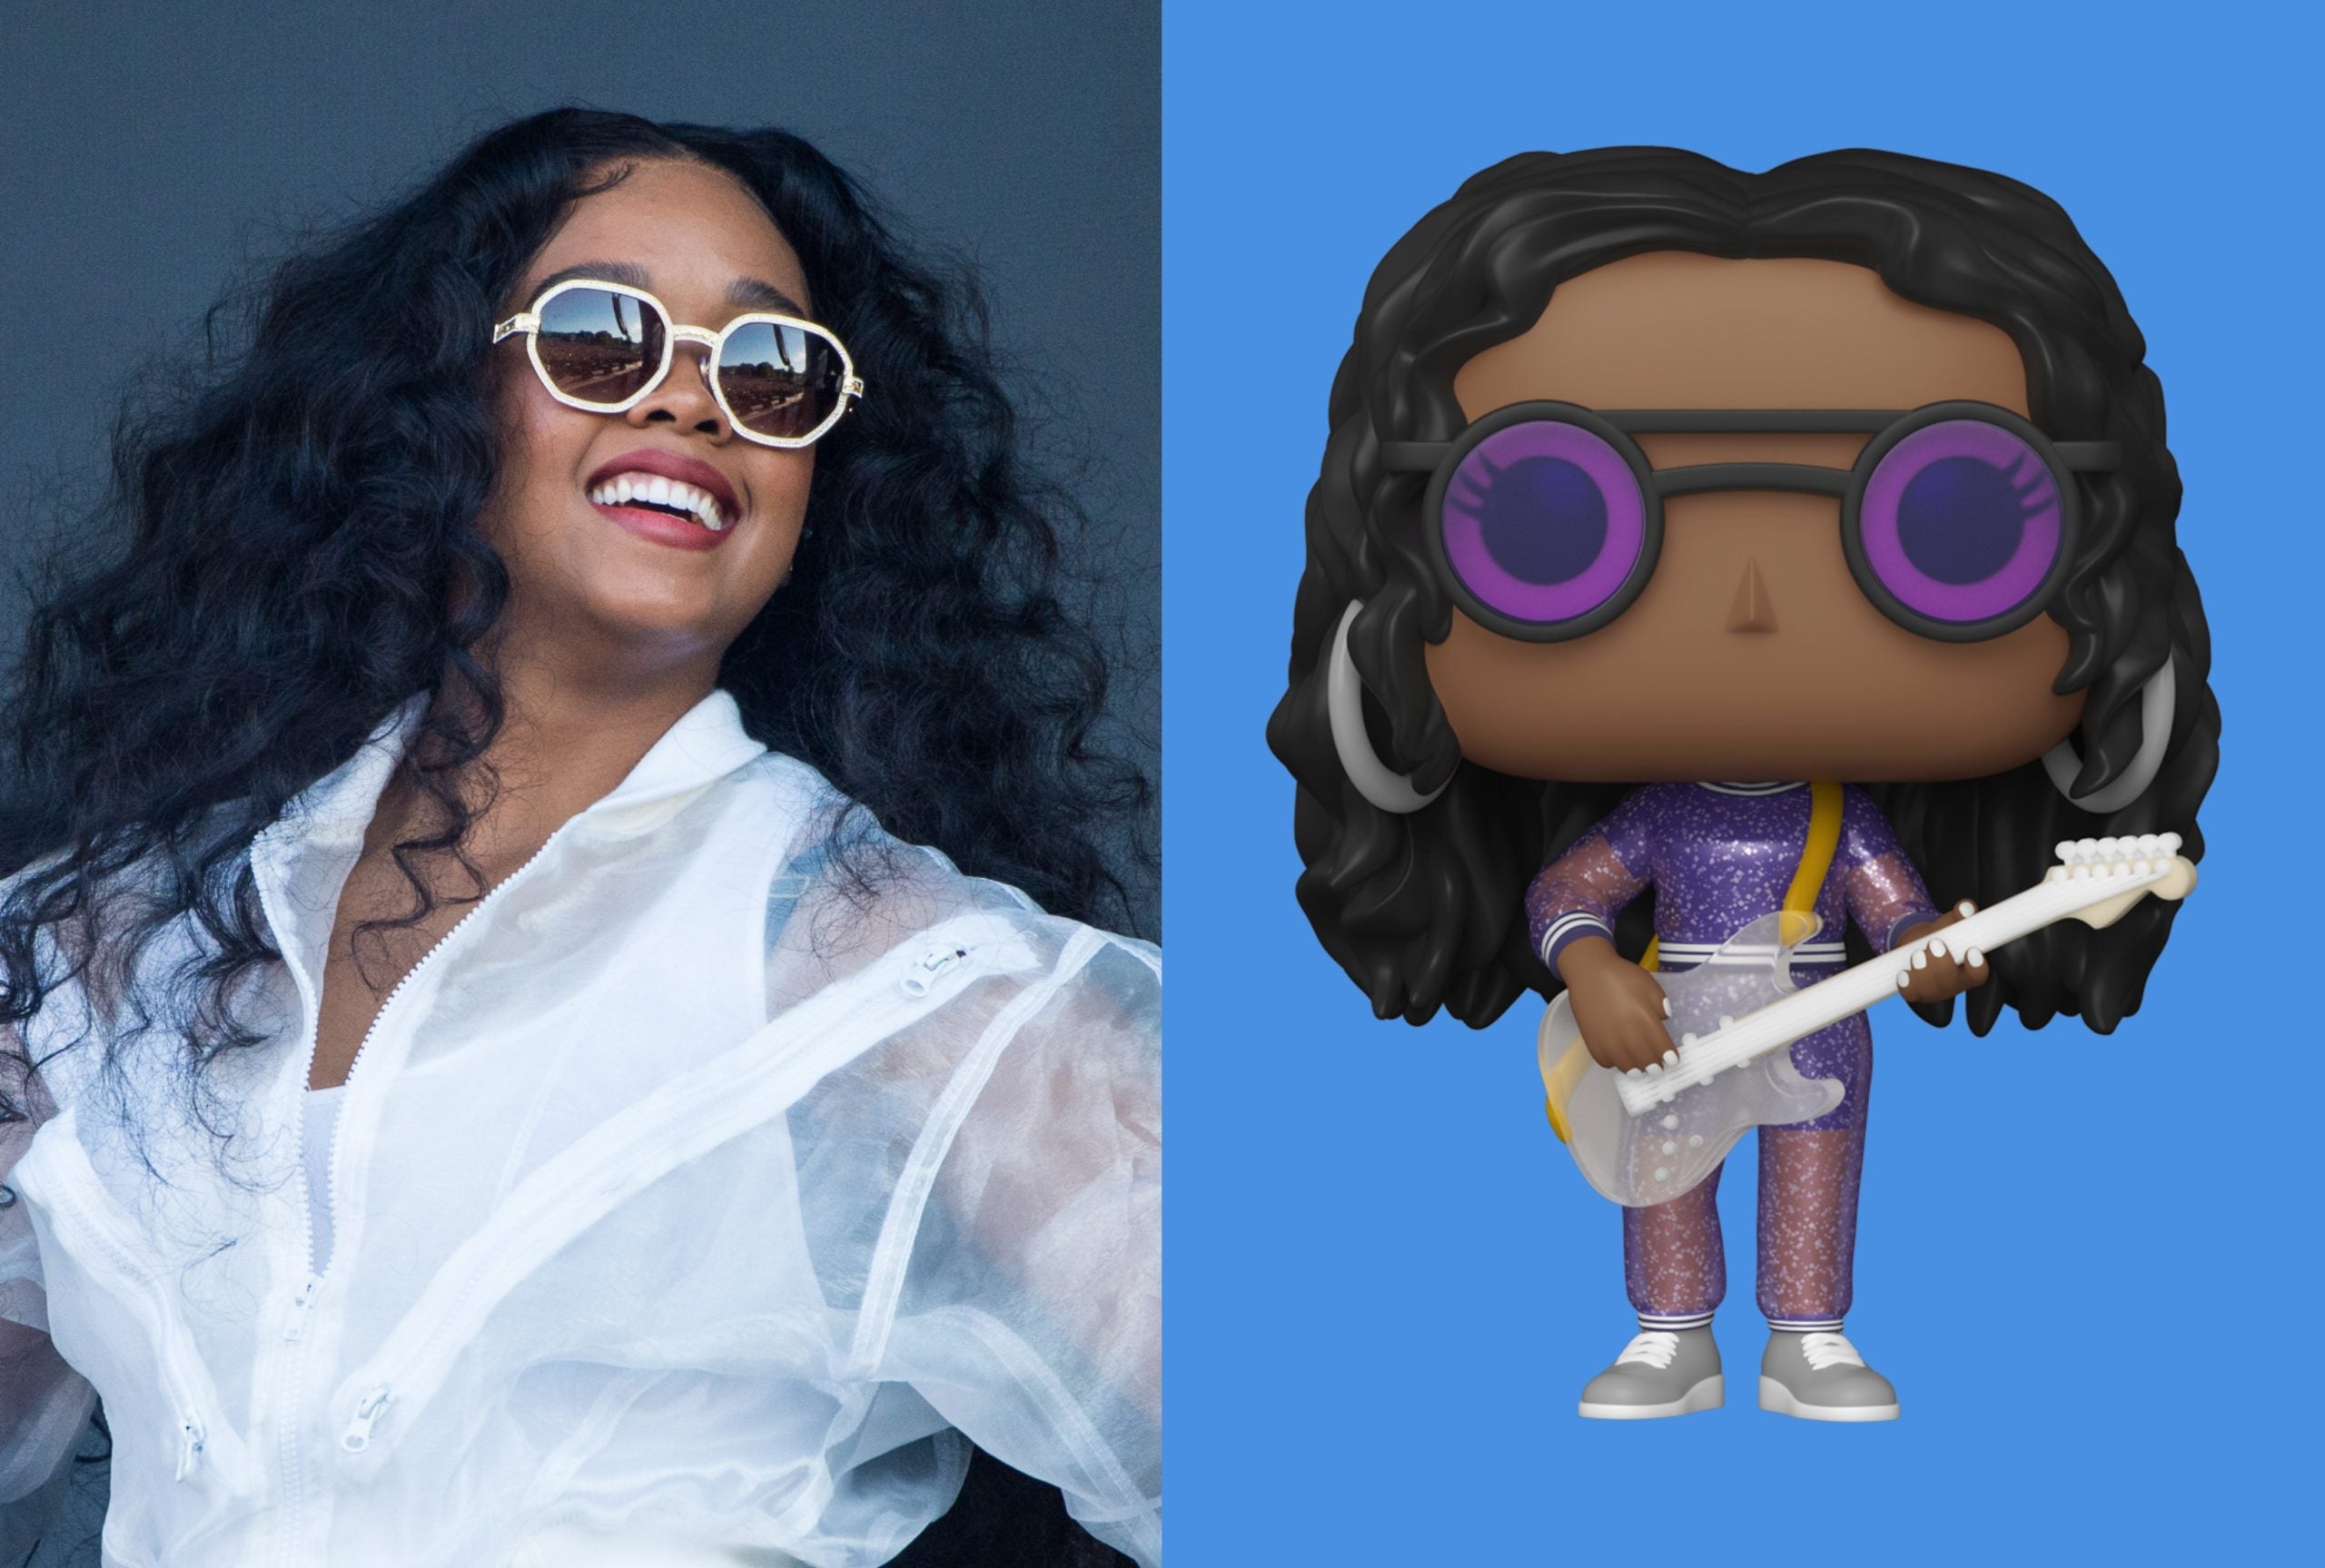 EXCLUSIVE: Funko Releases H.E.R. Pop! and GOLD Figurines